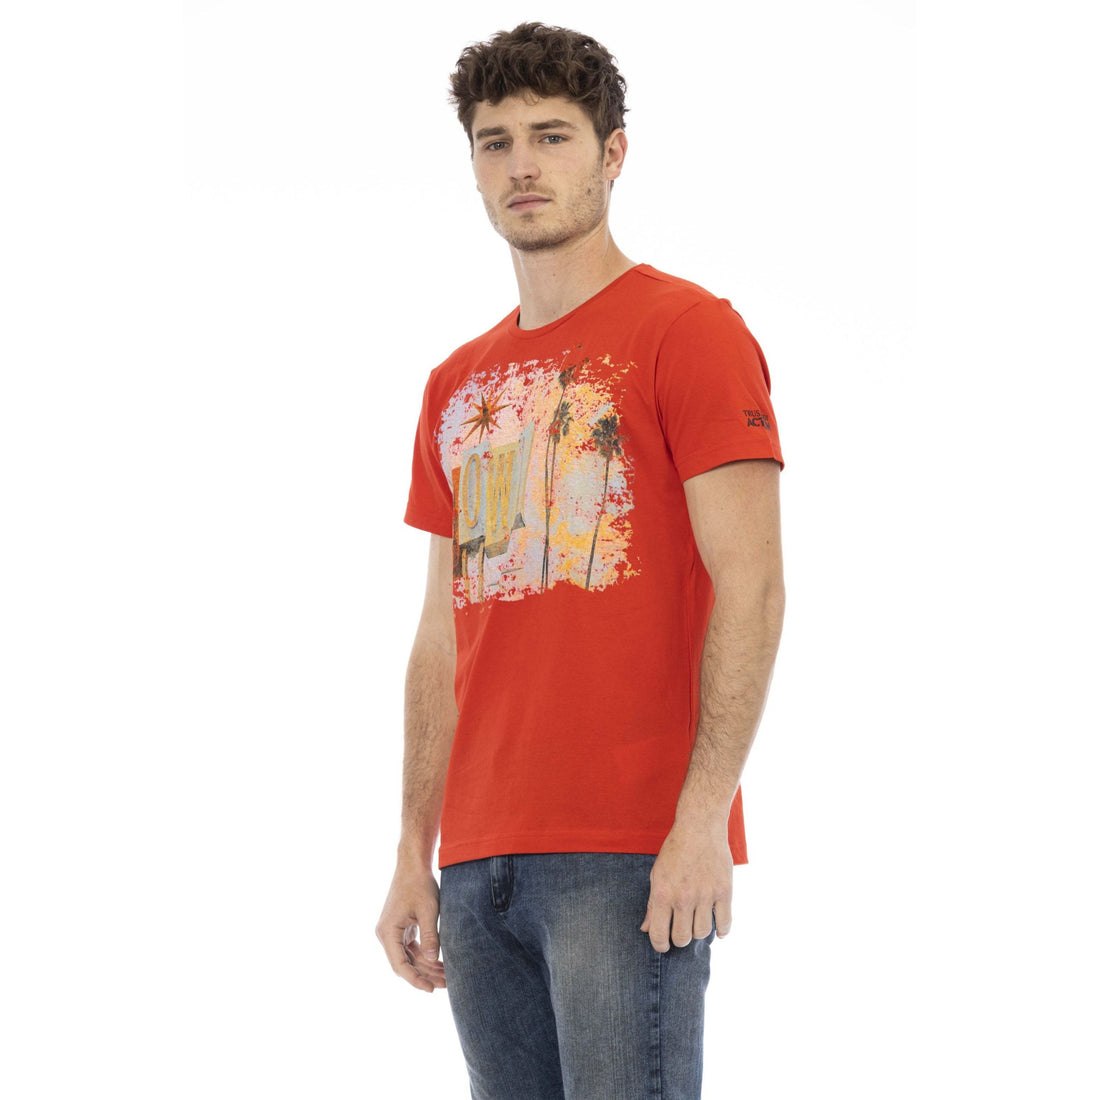 Trussardi Action Vibrant Red Round Neck Tee with Graphic Print